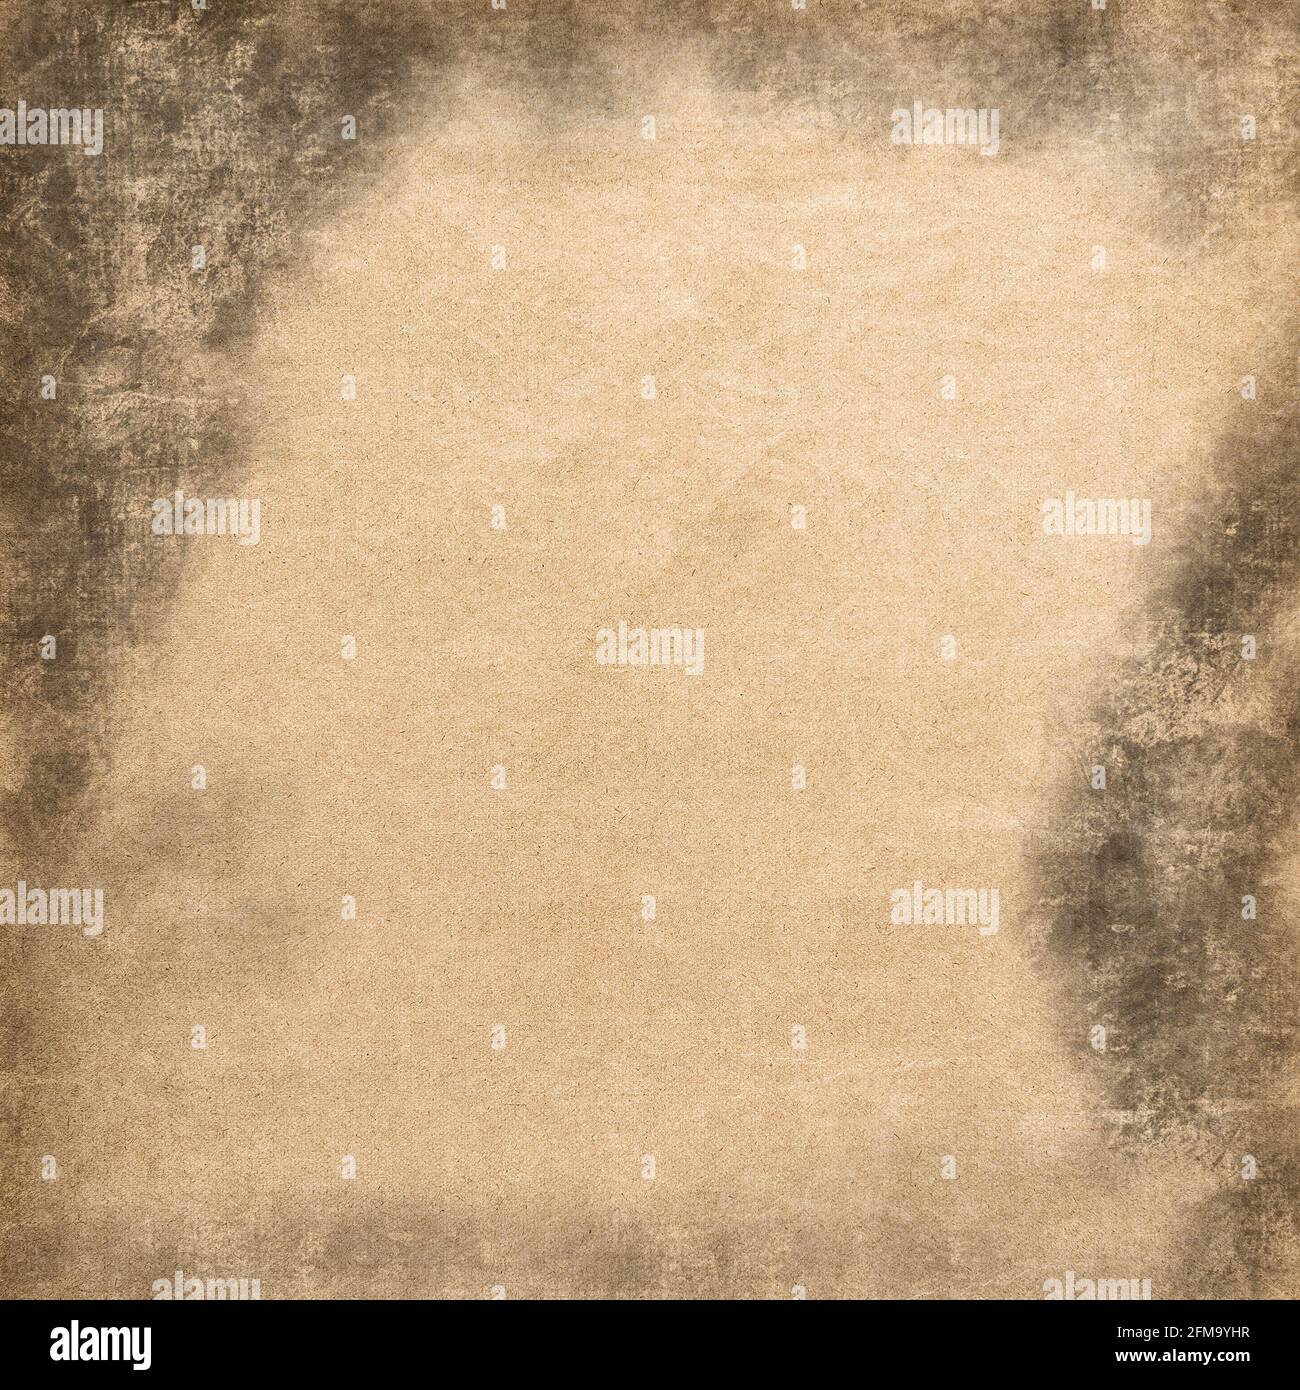 Grungy paper texture background for decoupage crafting scrapbooking Stock Photo